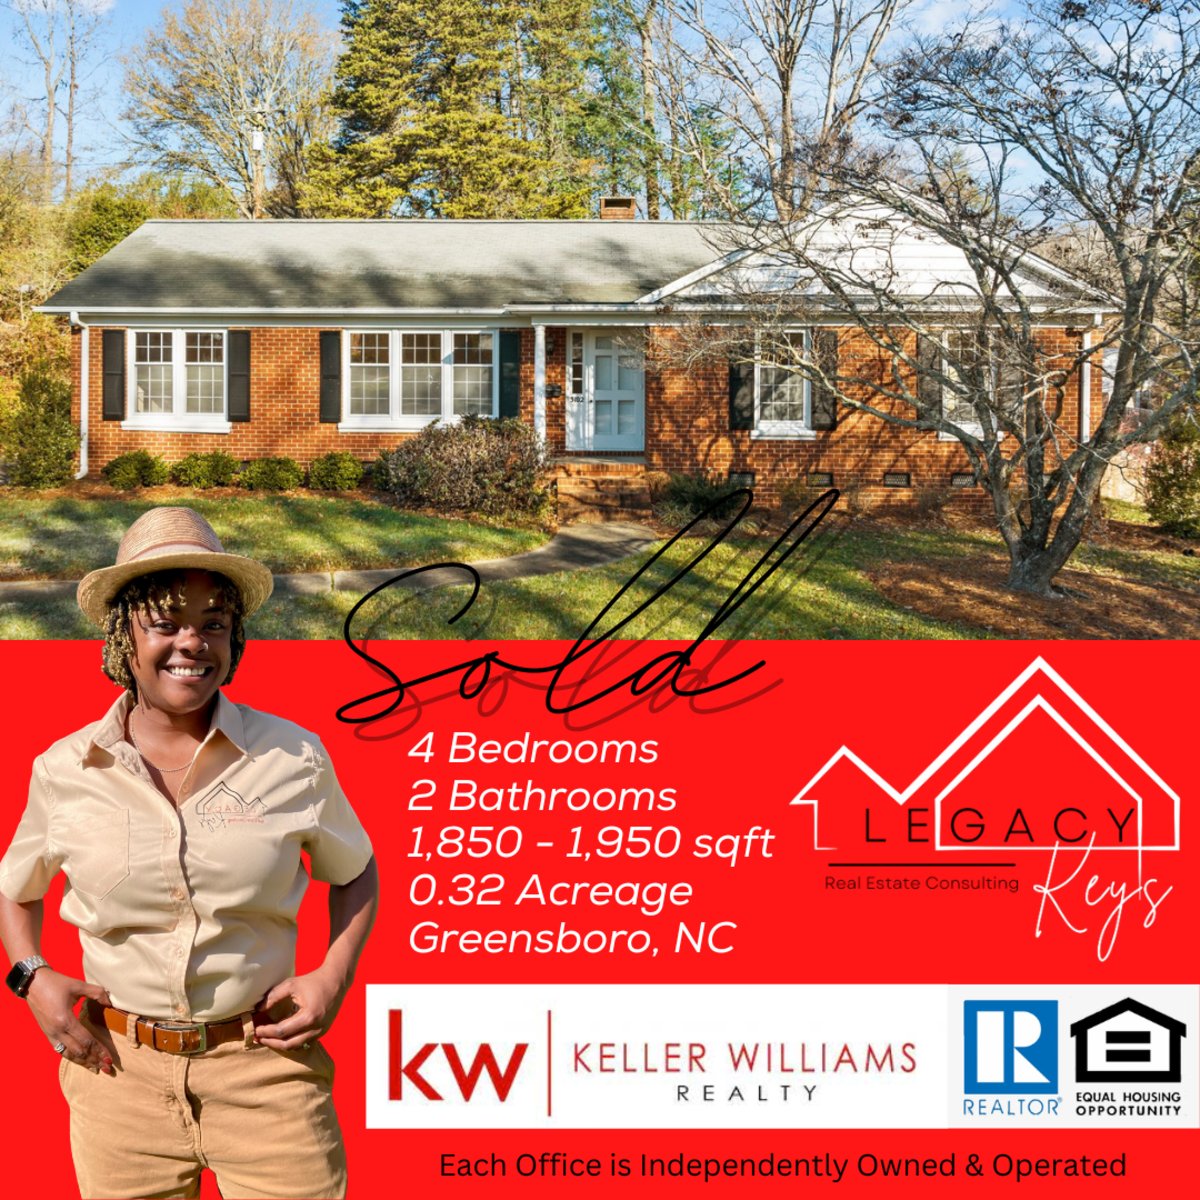 CONGRATS to these sellers for closing on this great home in Westwood! Shoutout to mobile closings for out of state clients!

#LegacyKeysNC #SoldByAsha #ClosingDay #Realtor #SellersAgent #ListingAgent #Equity #MobileClosings #RealEstate #Home #Invest